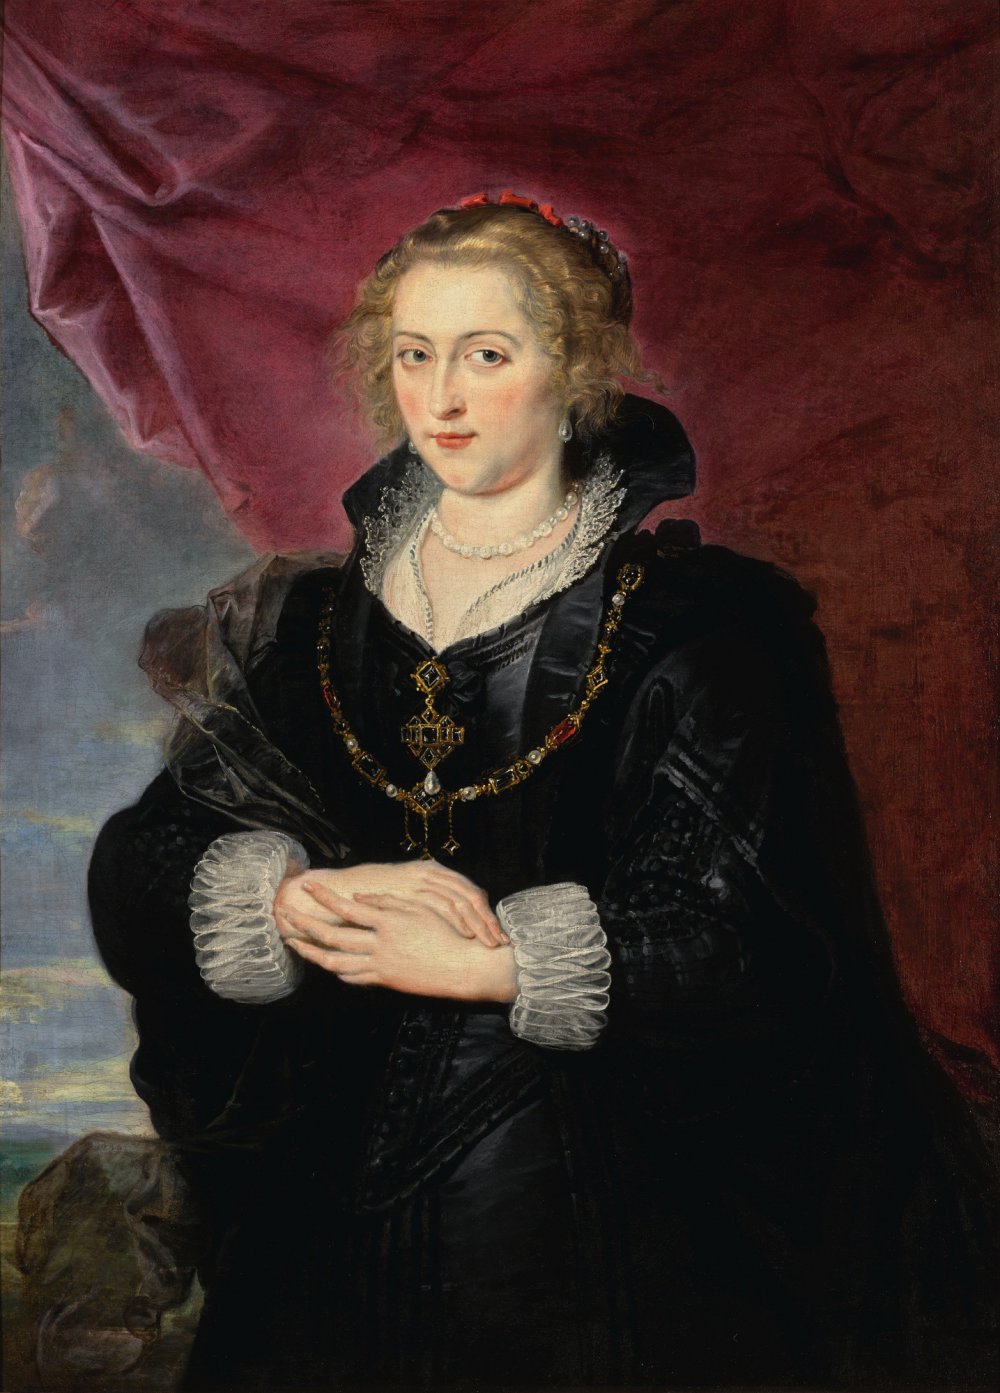 Sir Peter Paul Rubens, Portrait of a Lady, three-quarter length, wearing an elaborate black dress and cloak, before a red drape and a distant Landscape